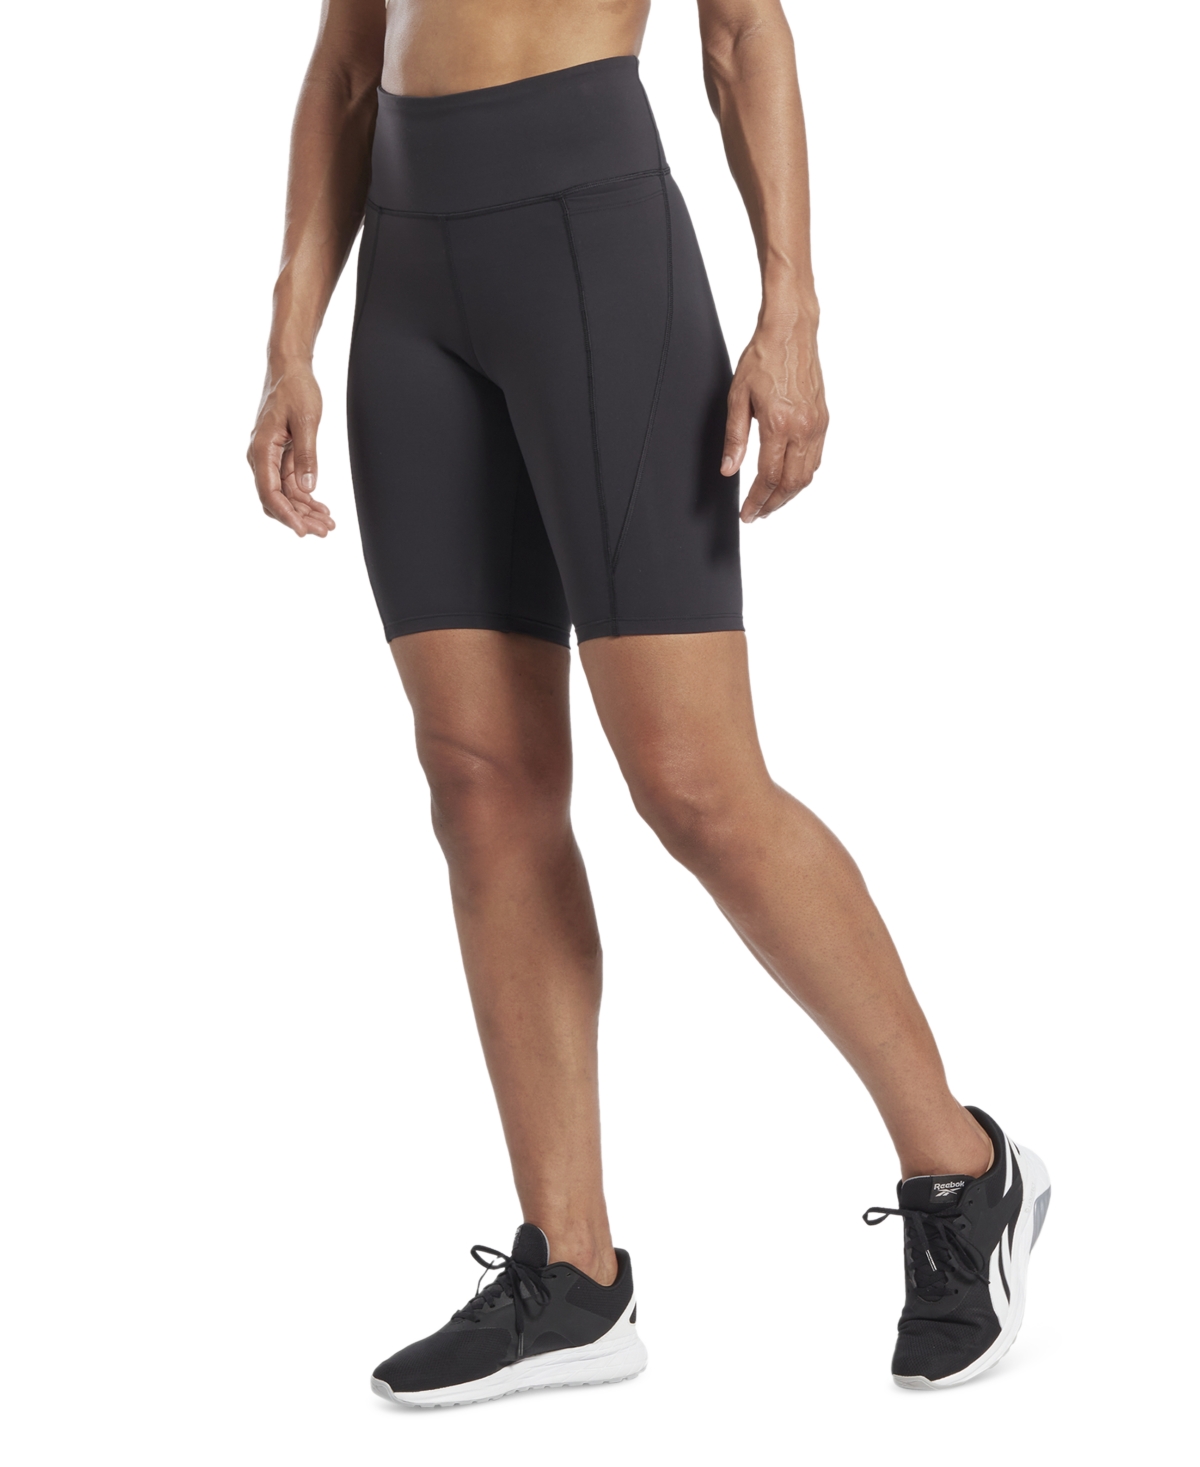 Women's Lux High-Rise Pull-On Bike Shorts, A Macy's Exclusive - Black